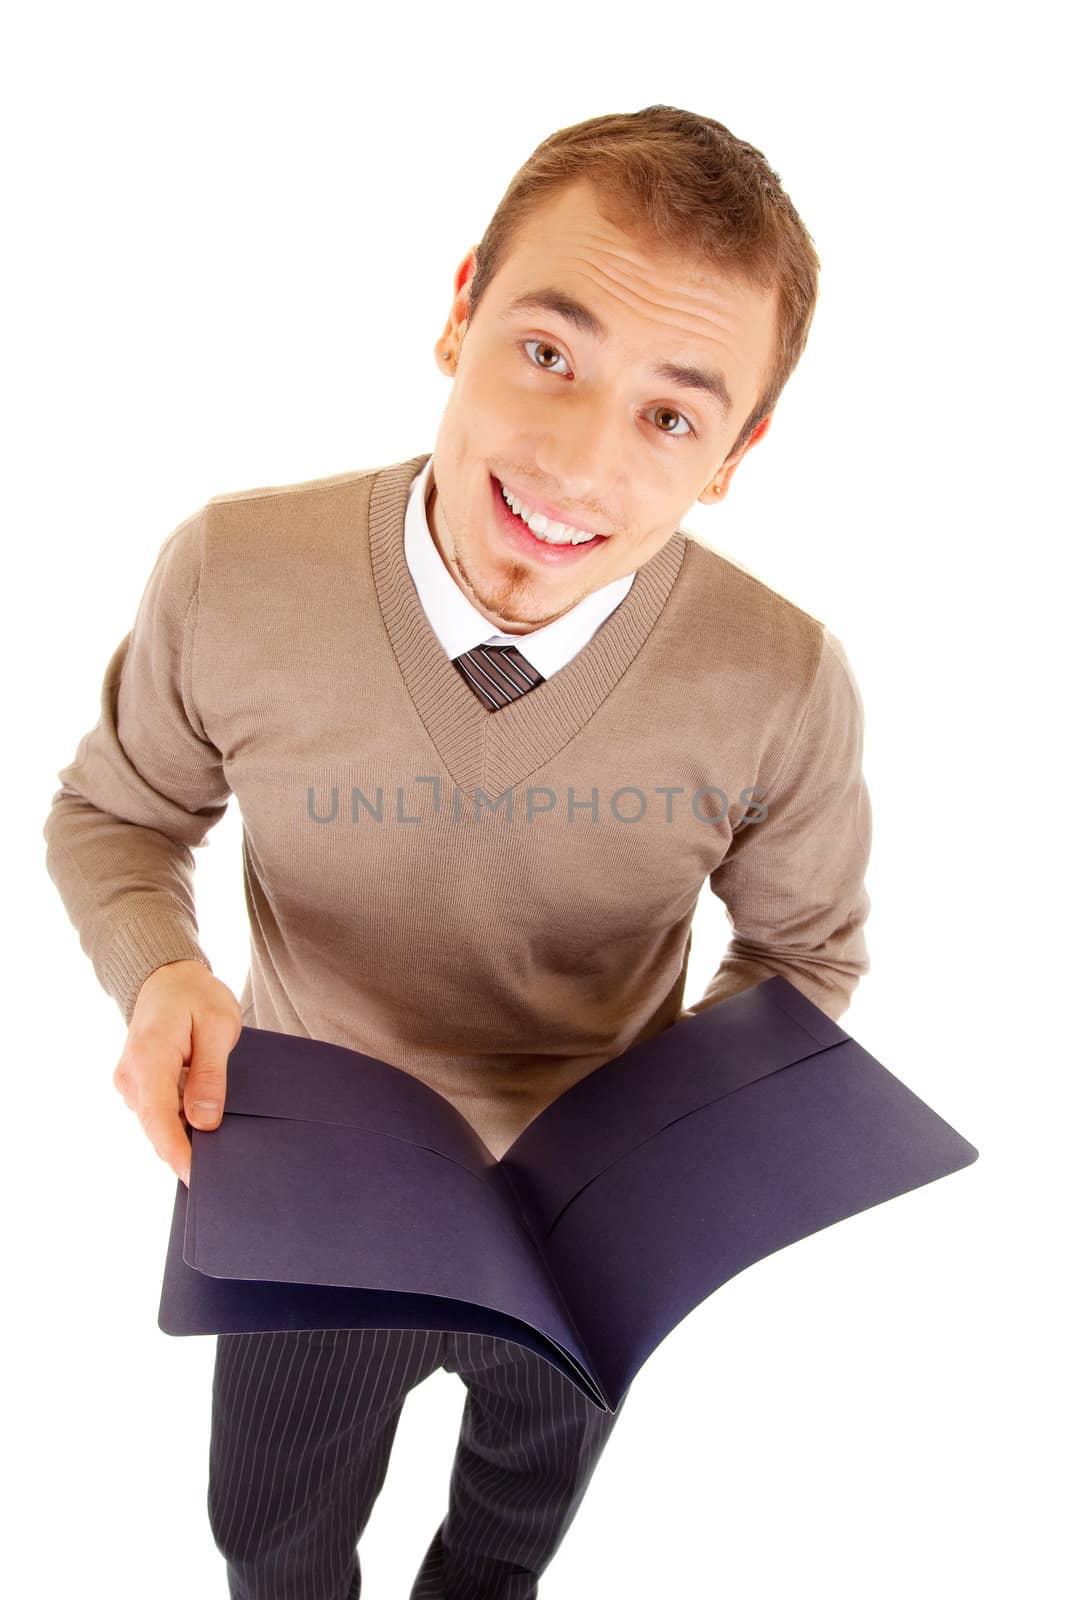 Young well-dressed man in formalwear is holding a files for documents. Isolated on white background.